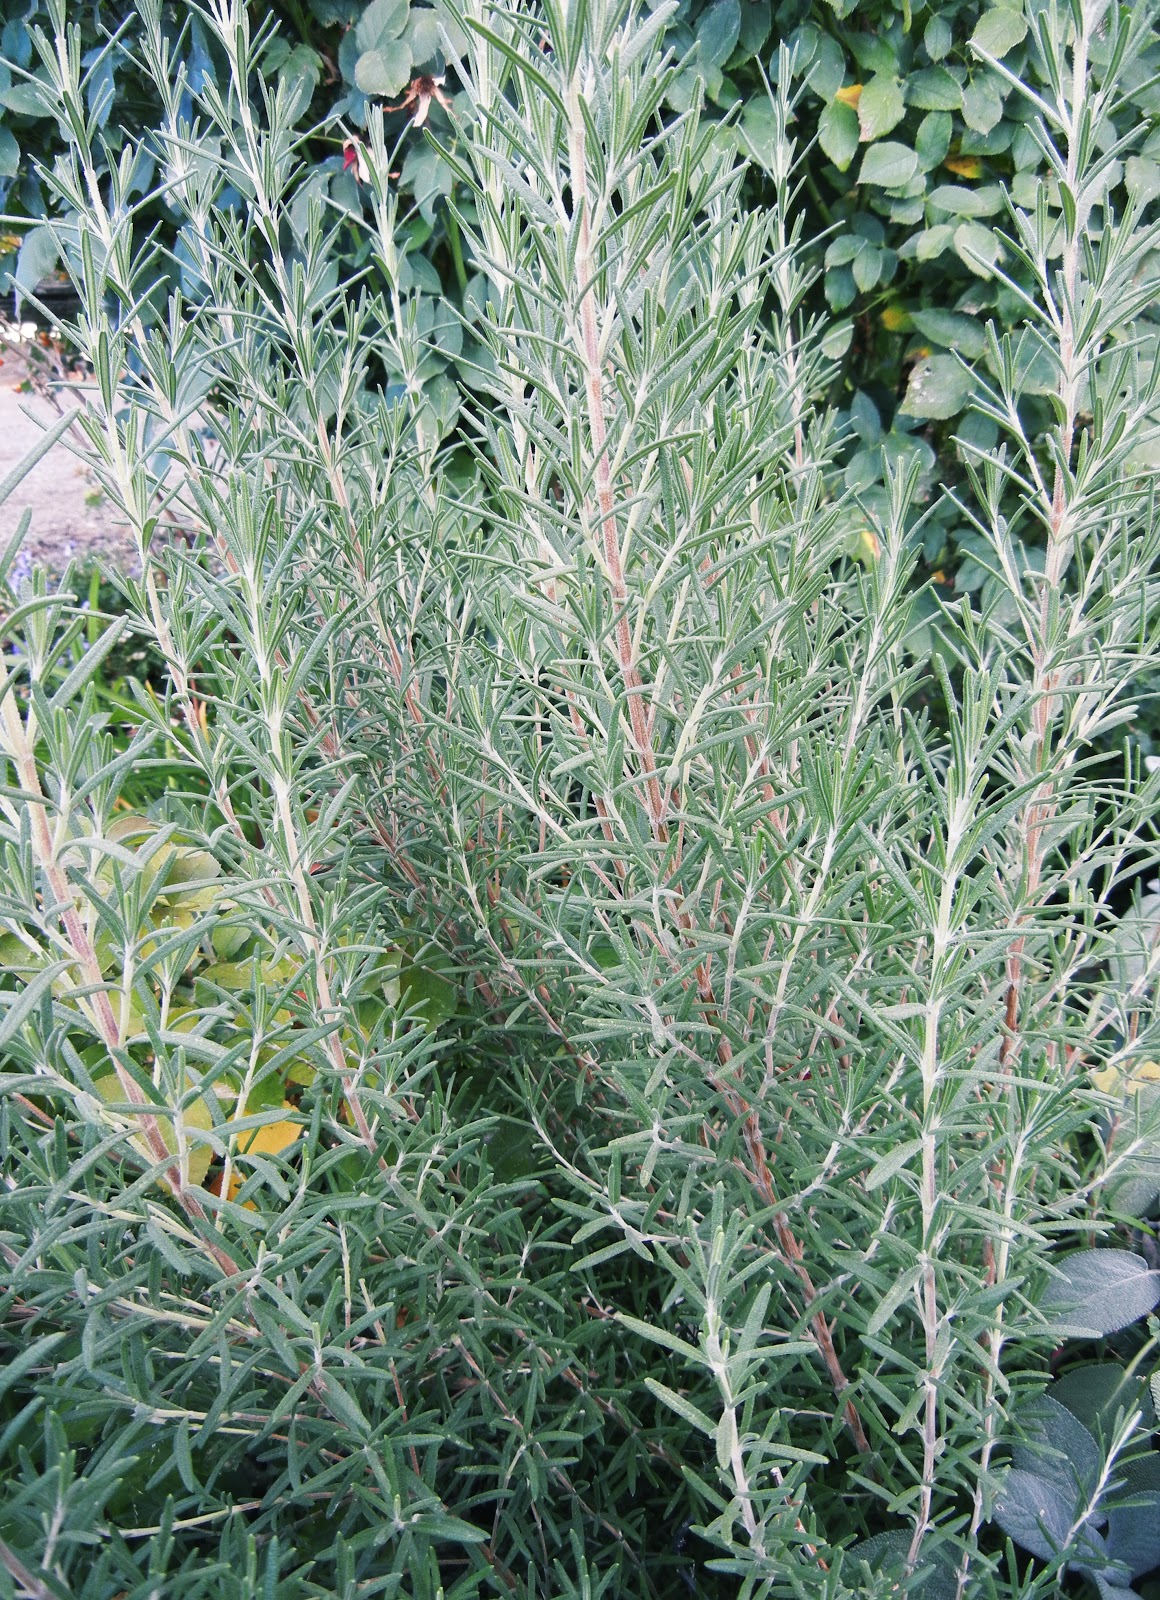 Taking a Look at Rosemary